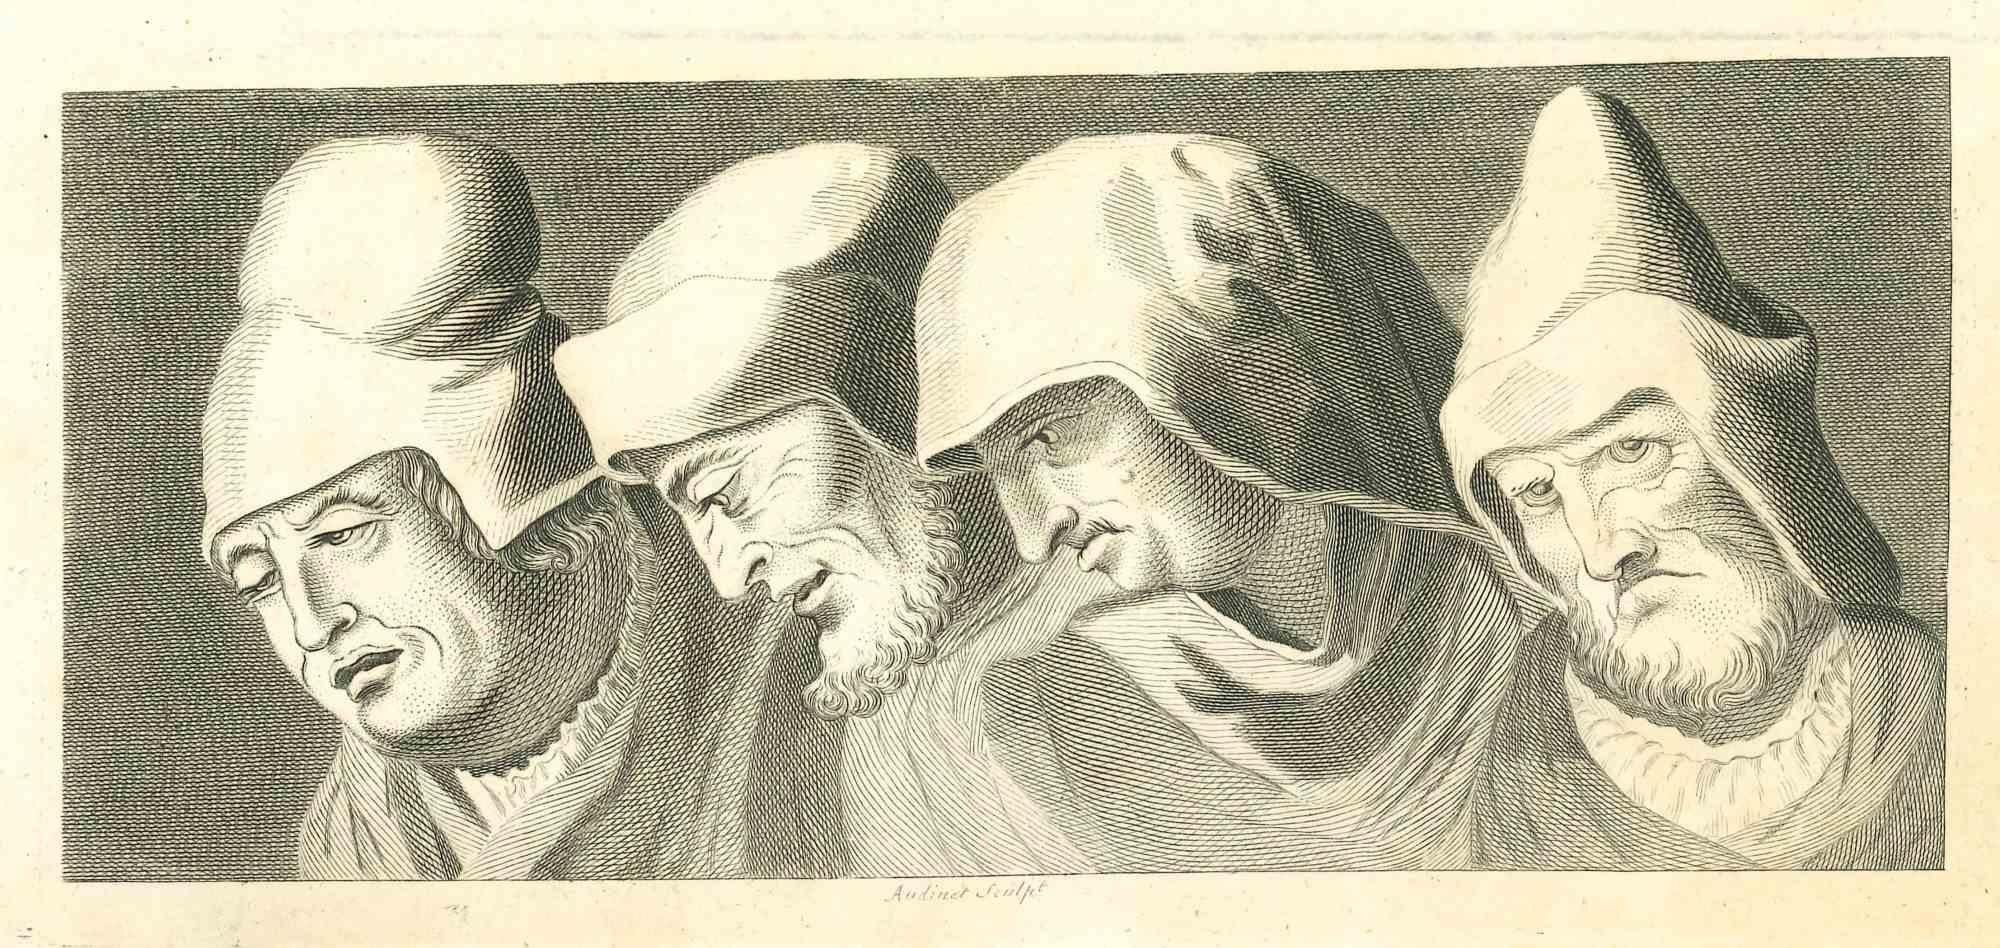 Heads of men is an original artwork realized by Philip Audinet for Johann Caspar Lavater's  "Essays on Physiognomy, Designed to promote the Knowledge and the Love of Mankind", London, Bensley, 1810. 

 This artwork portrays heads of men. On the back